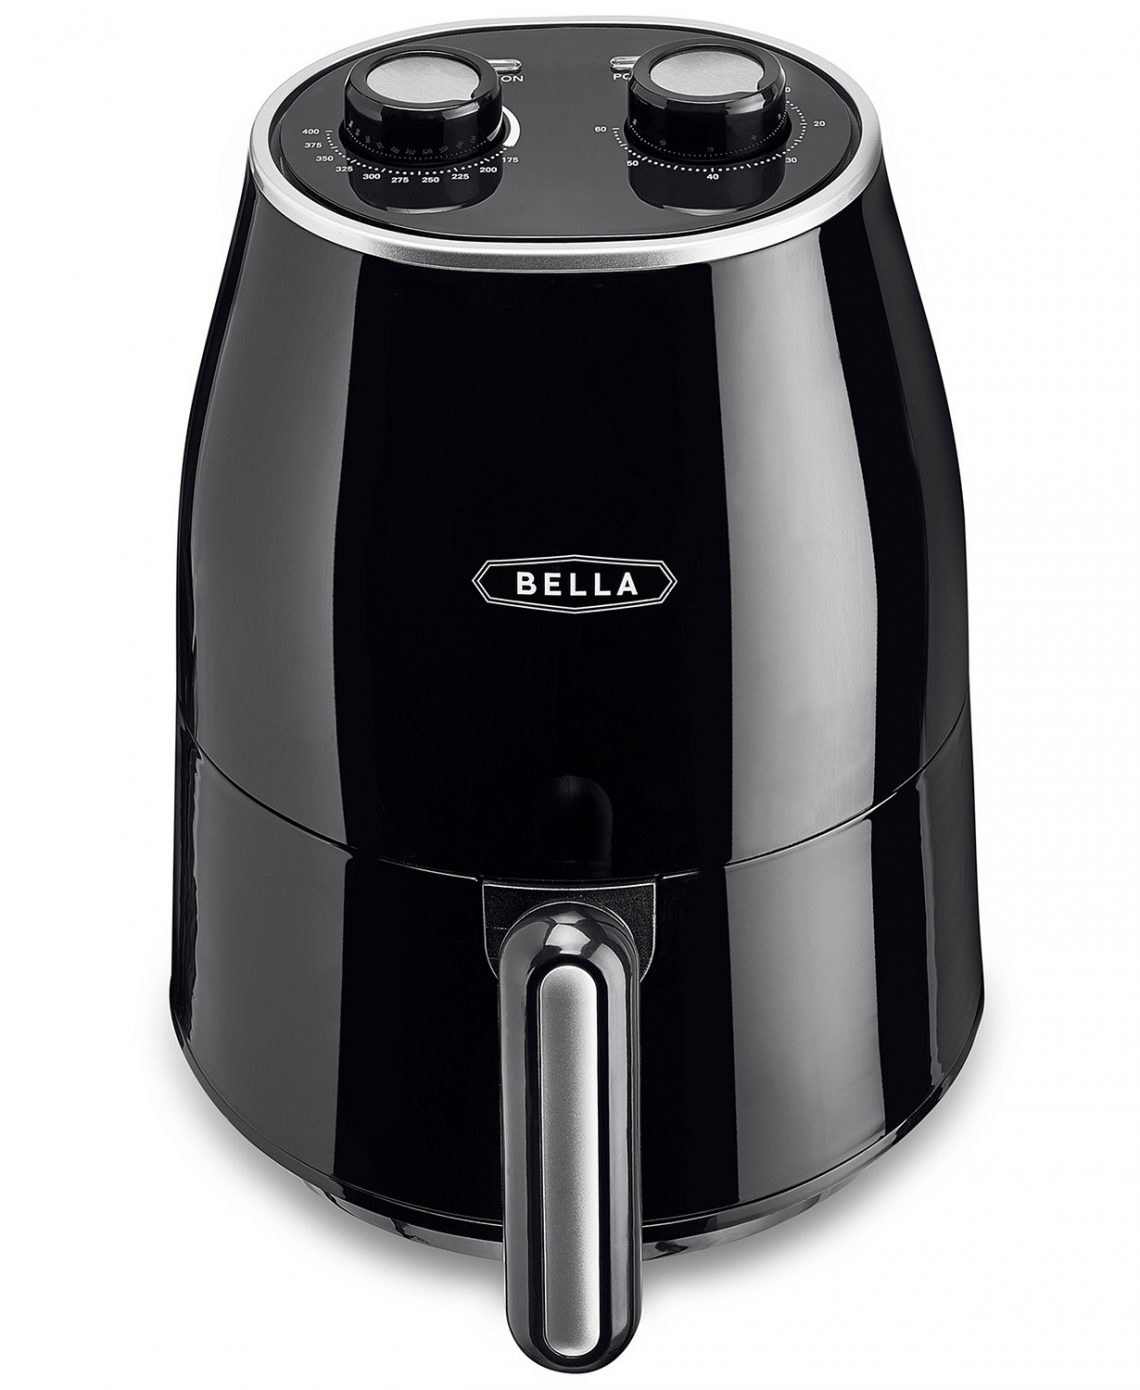 Bella 1 6 Qt Air Convection Fryer 19 99 After 10 Mail In Rebate Reg 